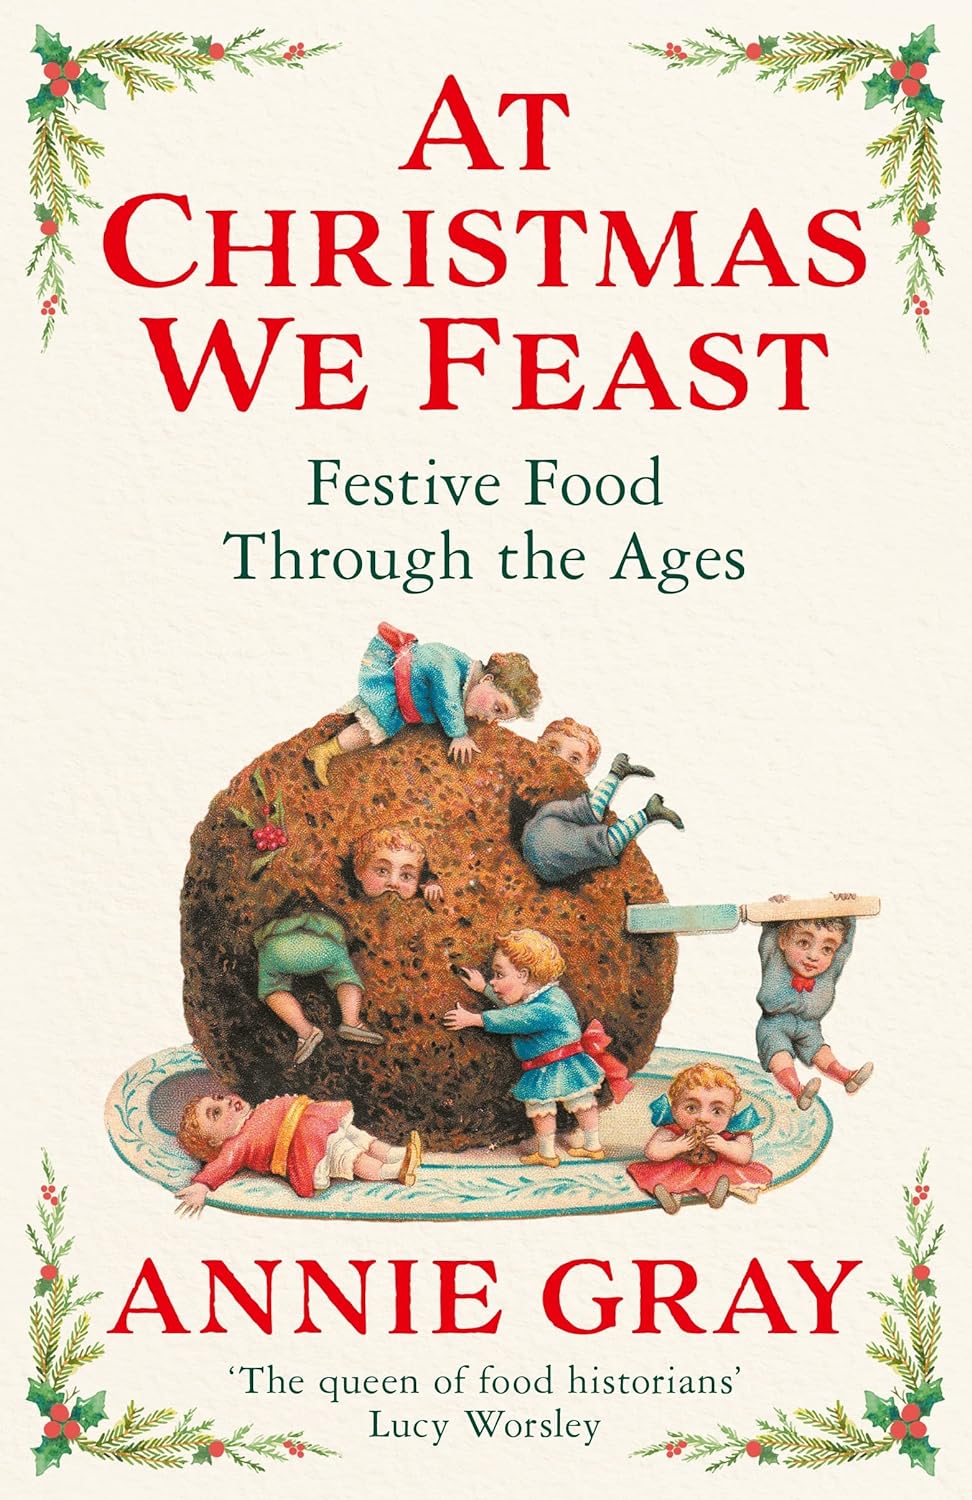 At Christmas We Feast: Festive Food Through The Ages by Annie Gray